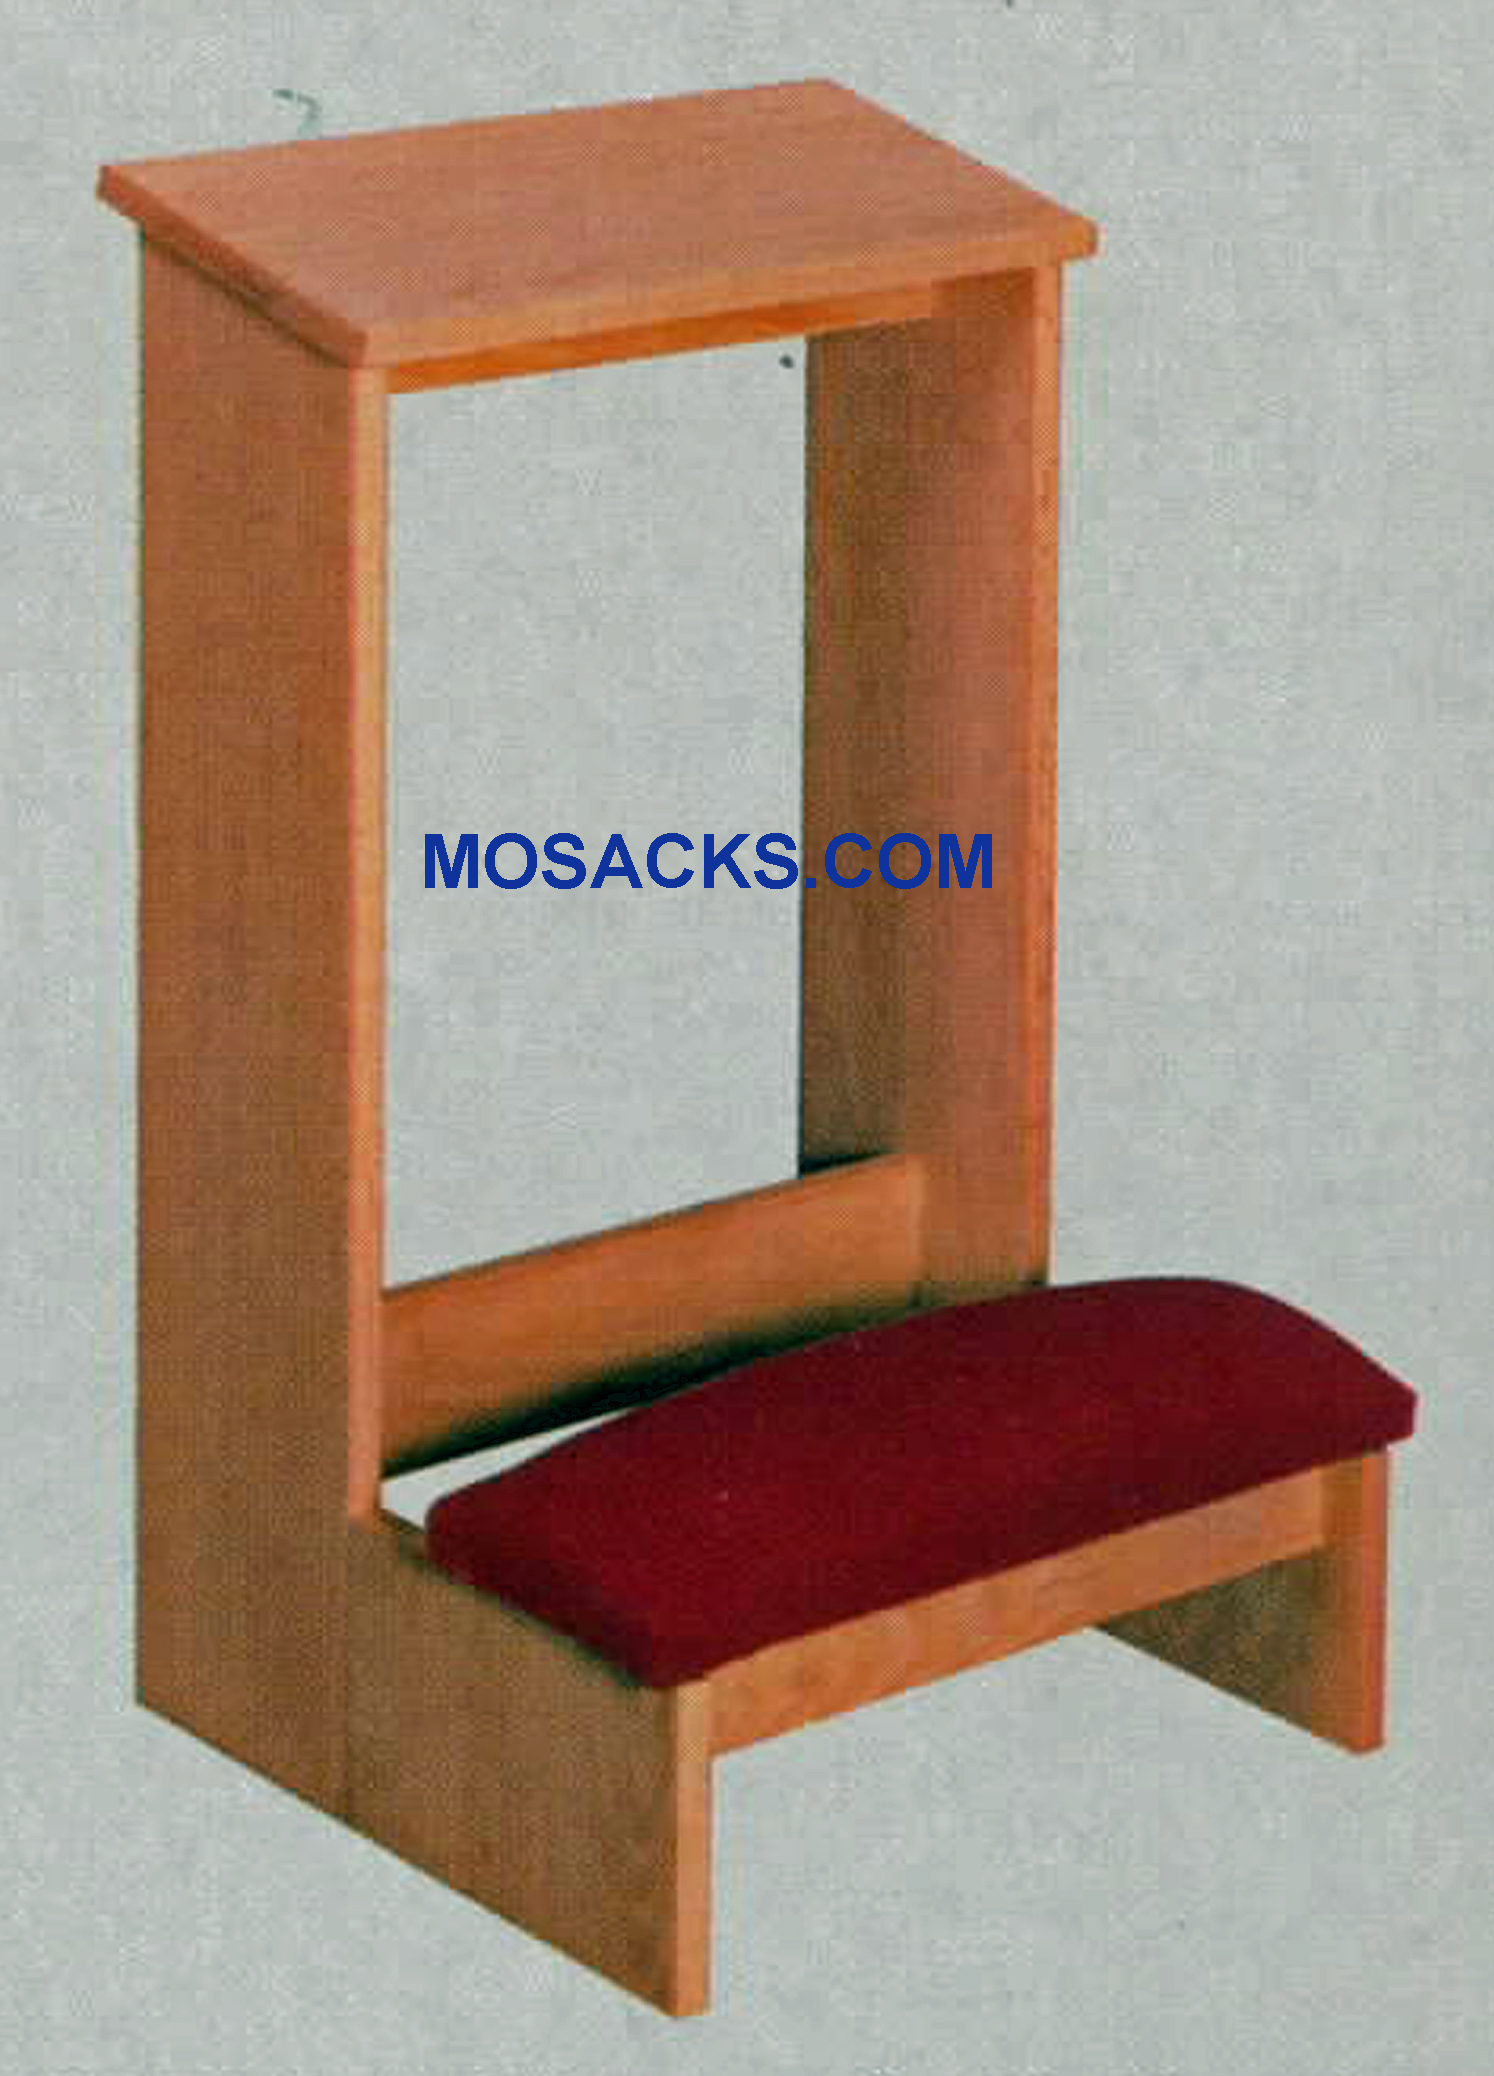 W Brand Prie Dieu with upholstered kneeler and a shelf 19" w x 19" d x 30" h #2300. This Prie Dieu Kneeler is finished wood with a slanted shelf for arm comfort and upholstered kneeler. Various wood stains and colored fabrics are available #2300